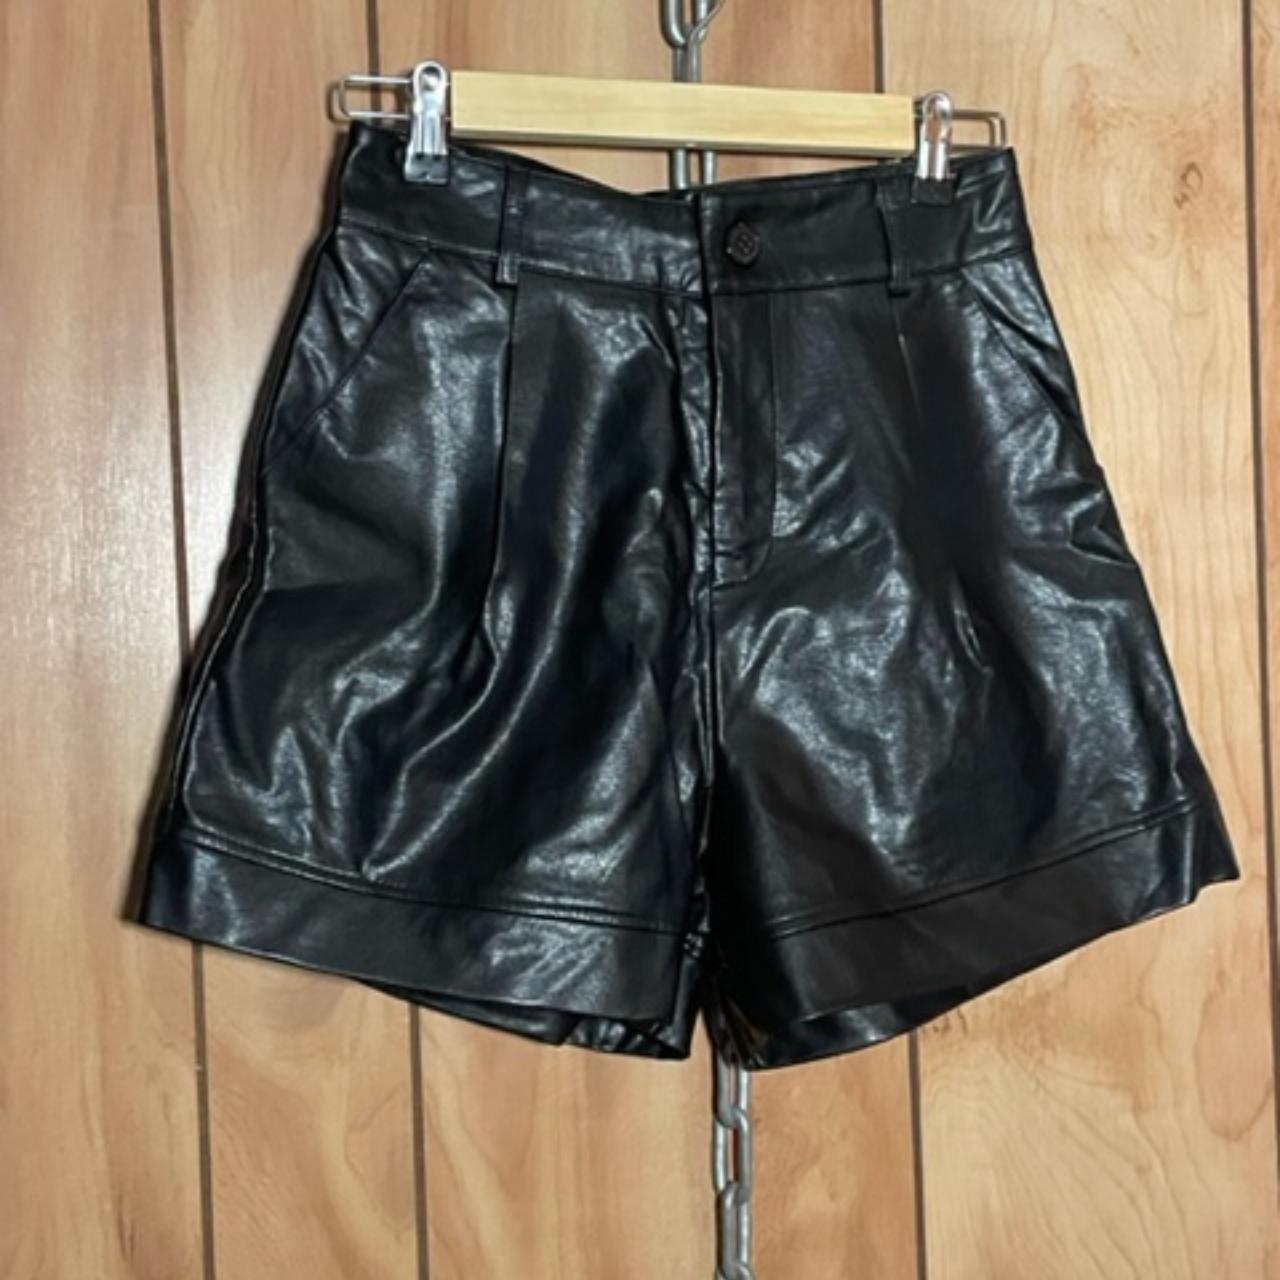 Faux leather black high waisted shorts. Length: 15... - Depop